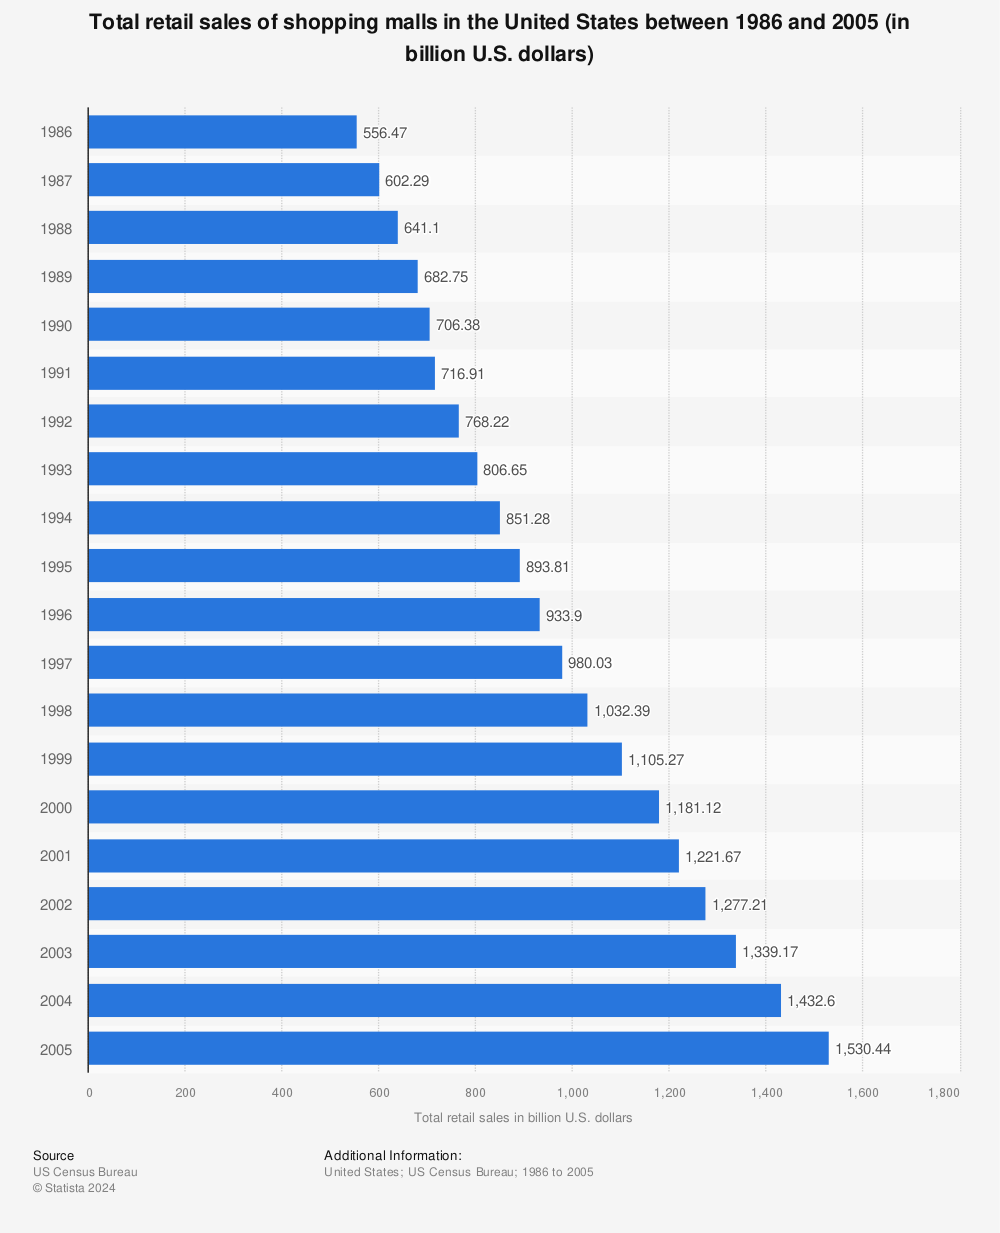 Statistic: Total retail sales of shopping malls in the United States between 1986 and 2005 (in billion U.S. dollars) | Statista